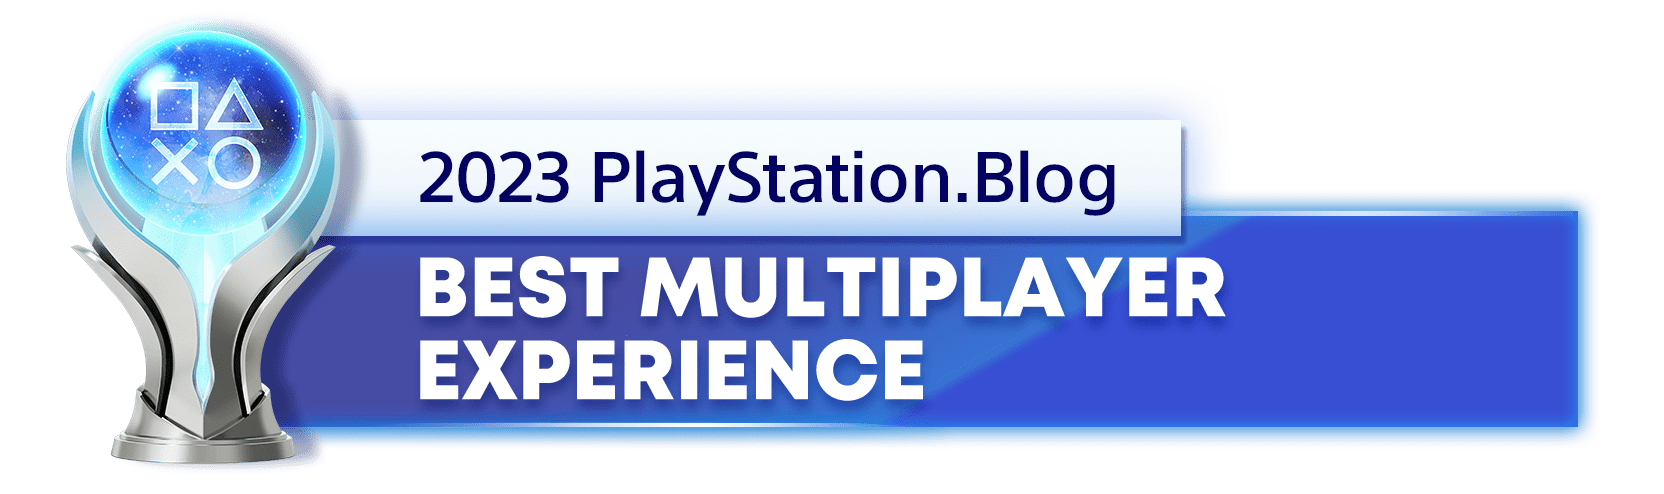 Platinum Trophy for the 2023 PlayStation Blog Best Multiplayer Experience Winner